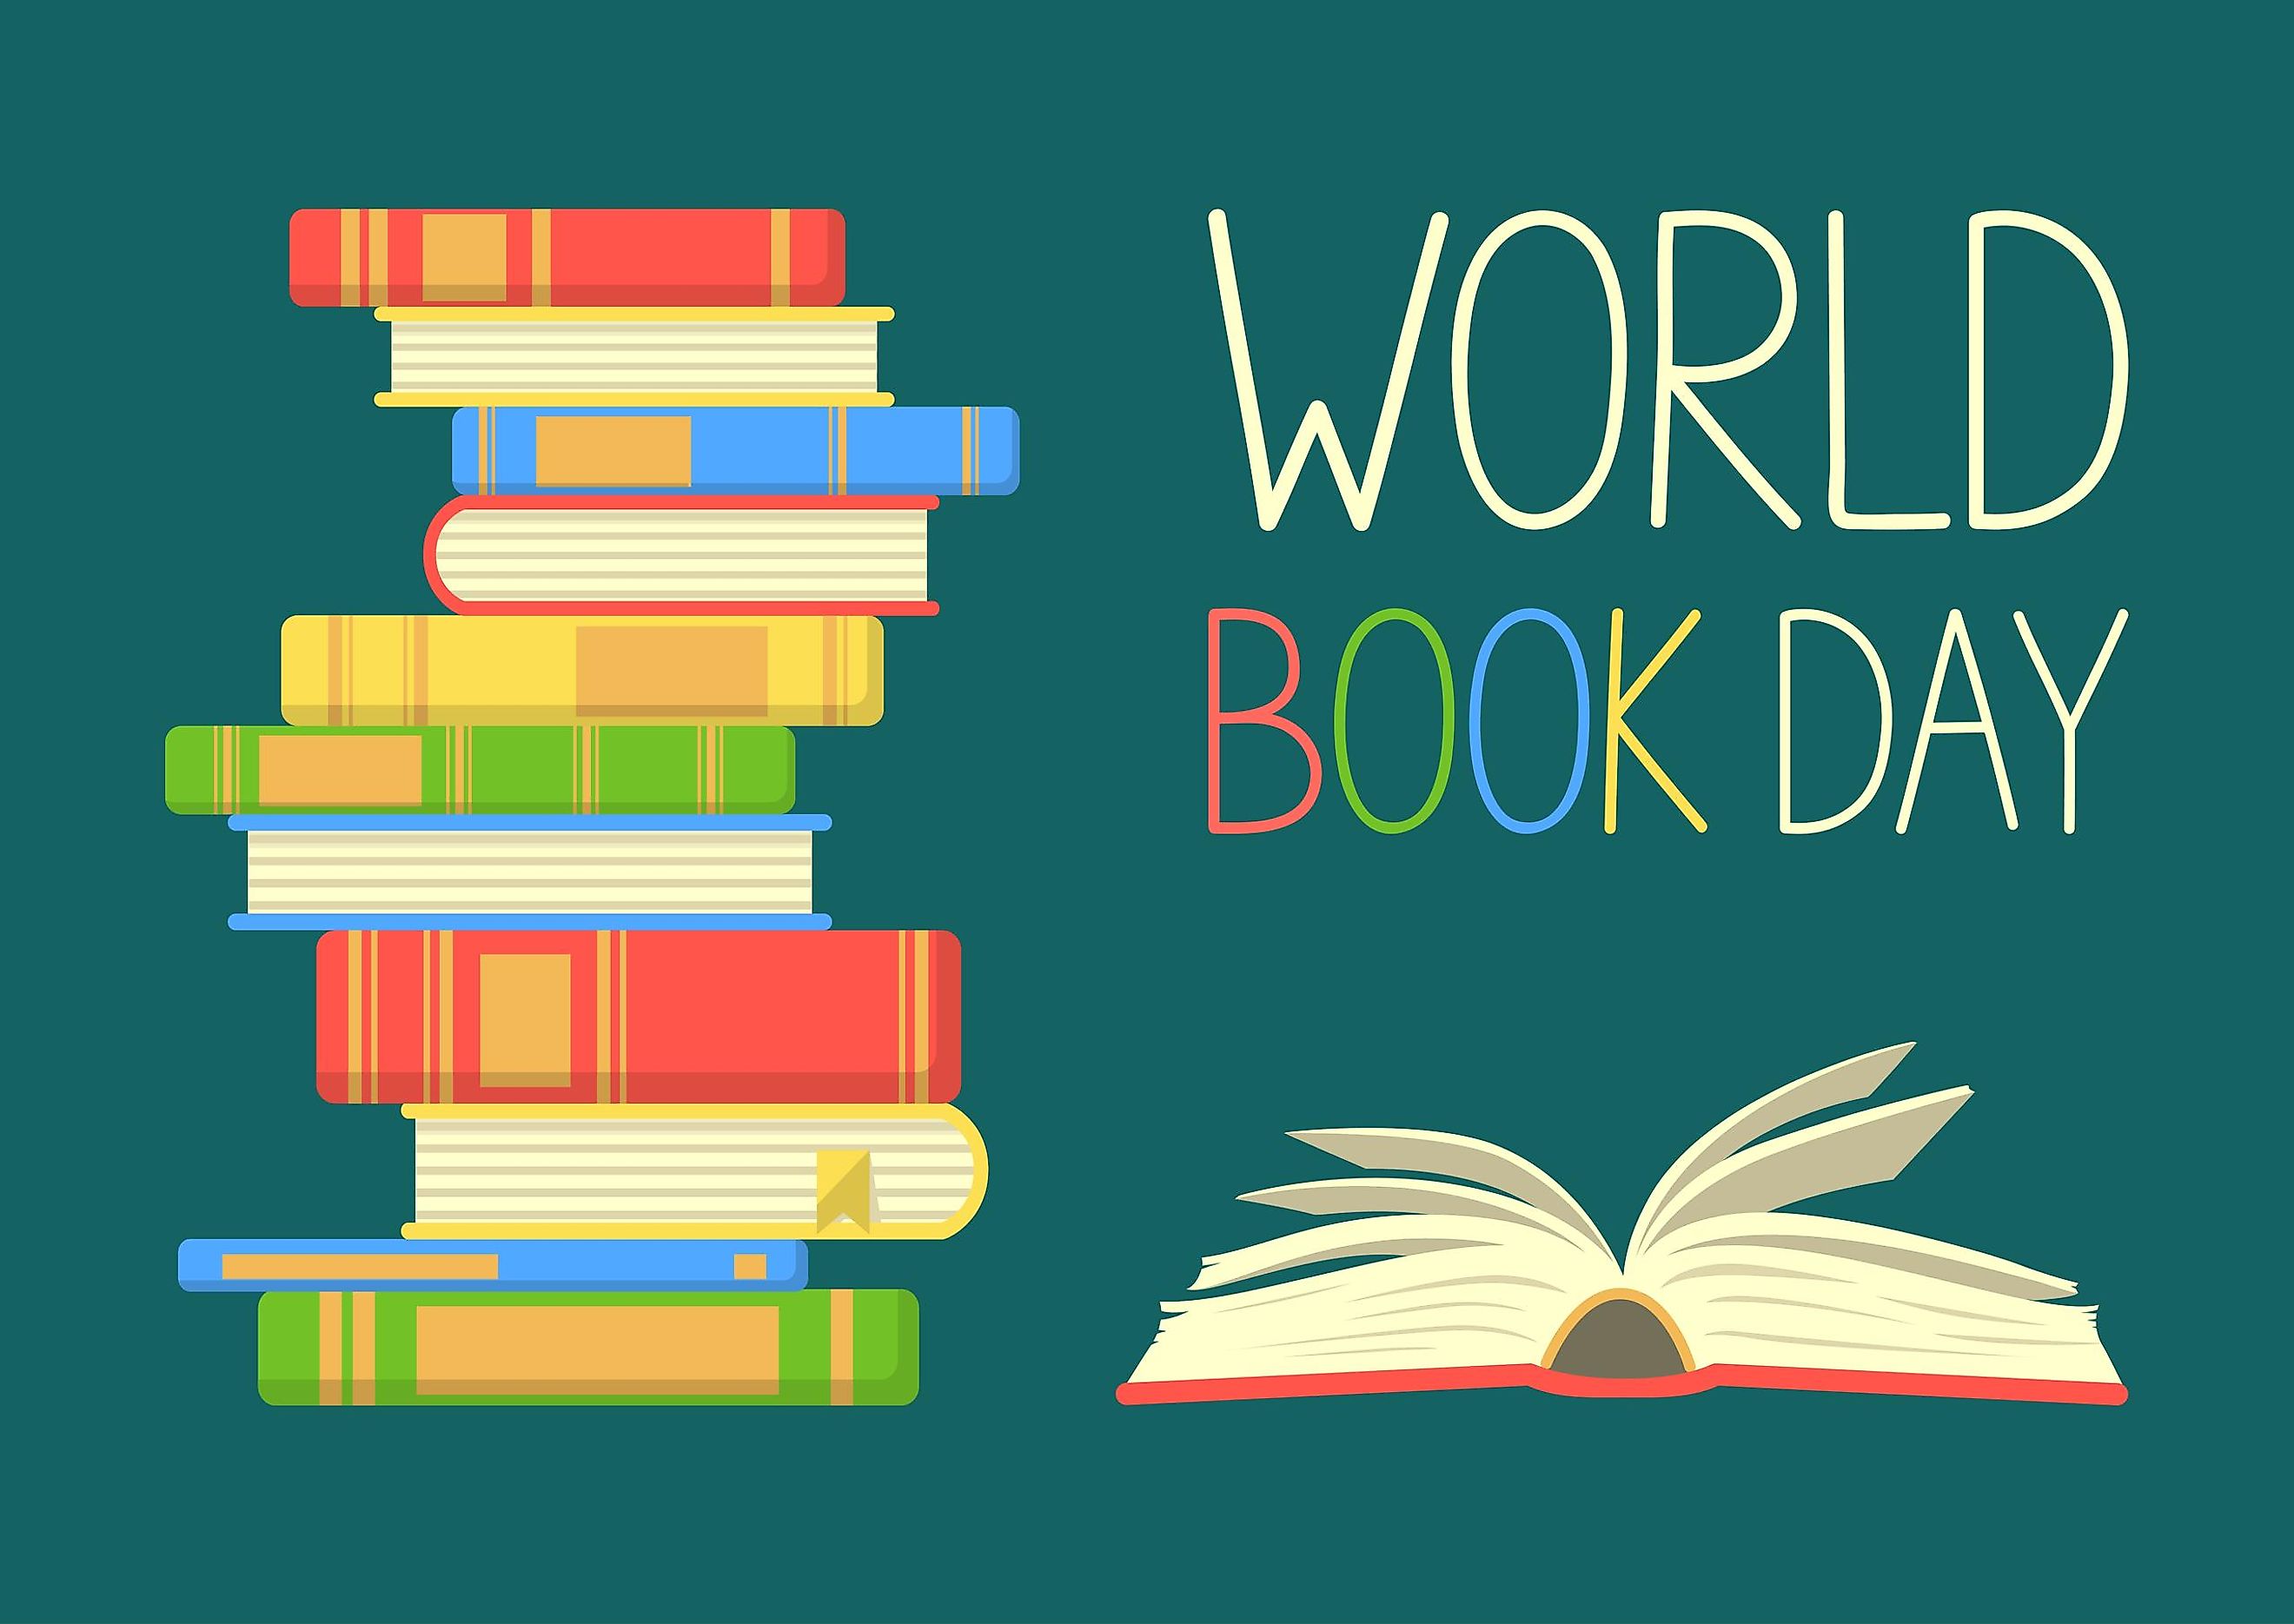 When And Why Is World Book Day Celebrated? - WorldAtlas